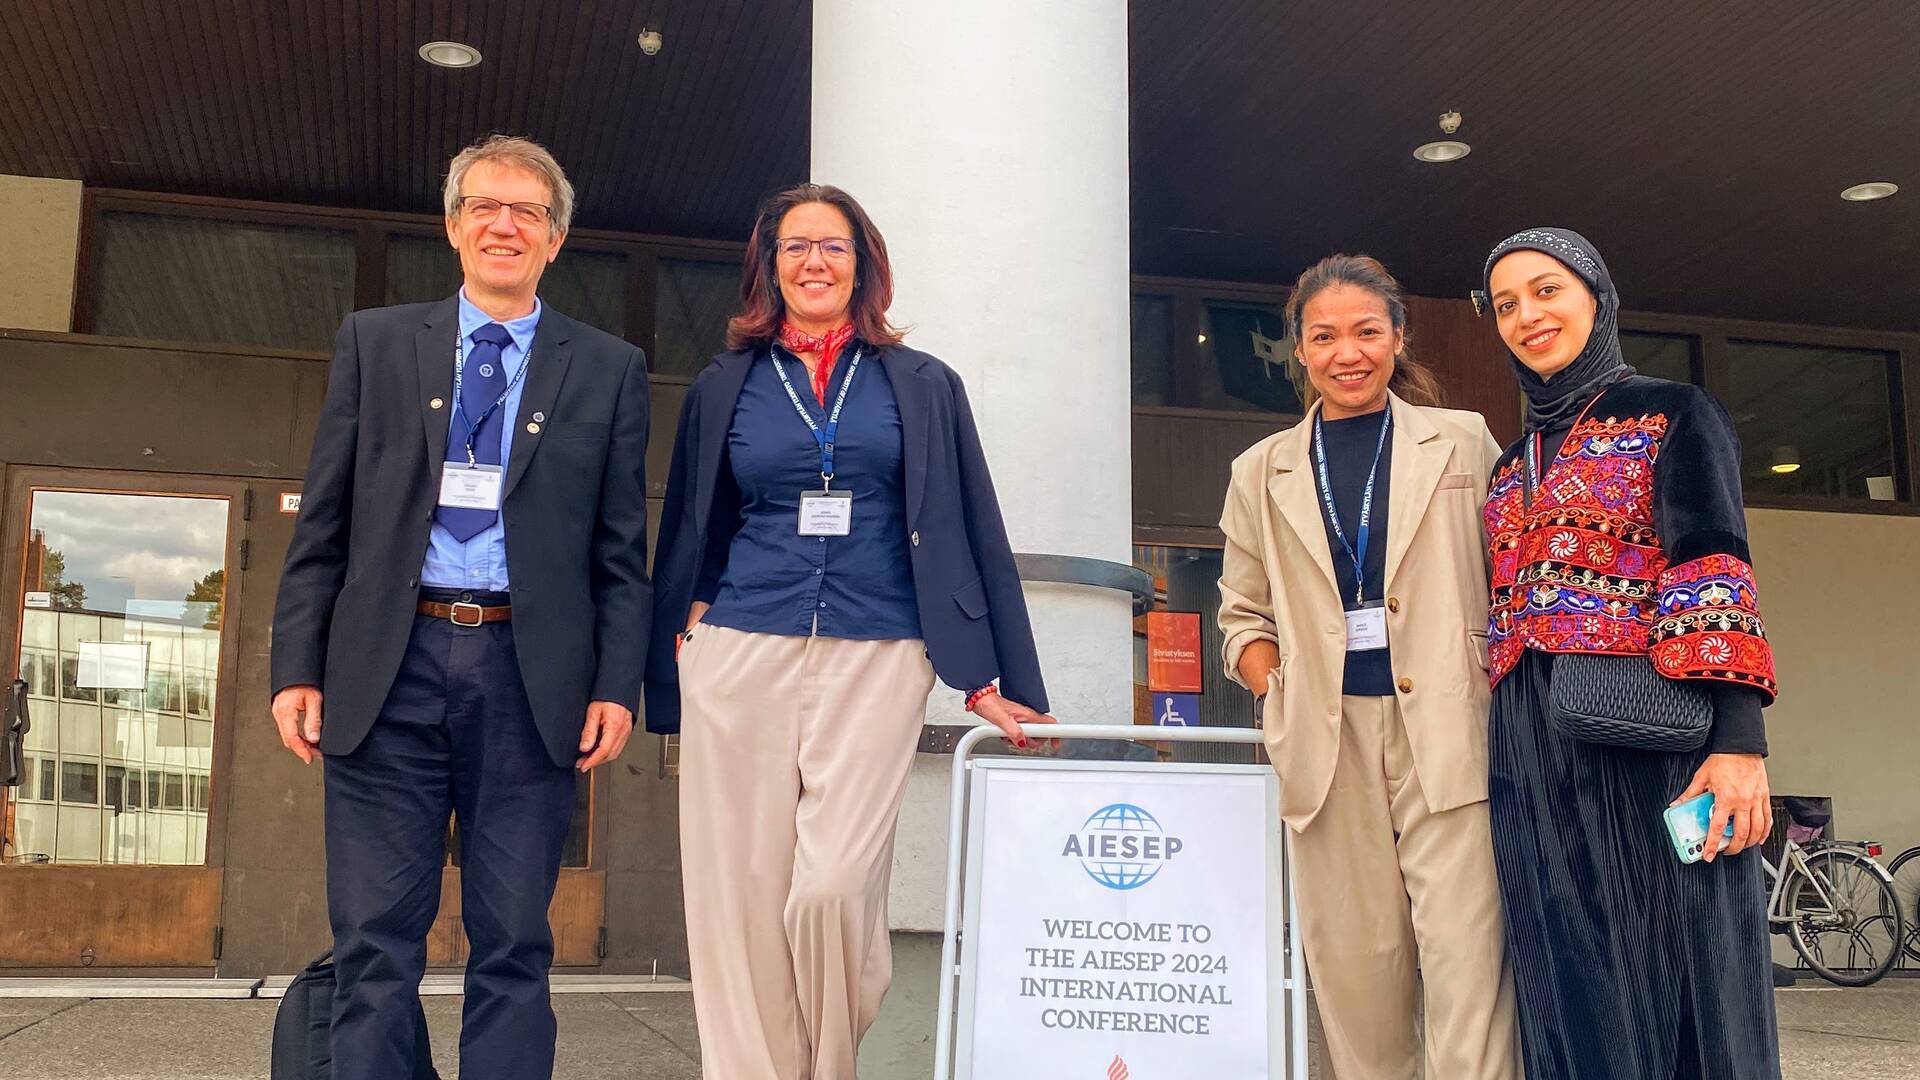 TF participates at AIESEP conference with success